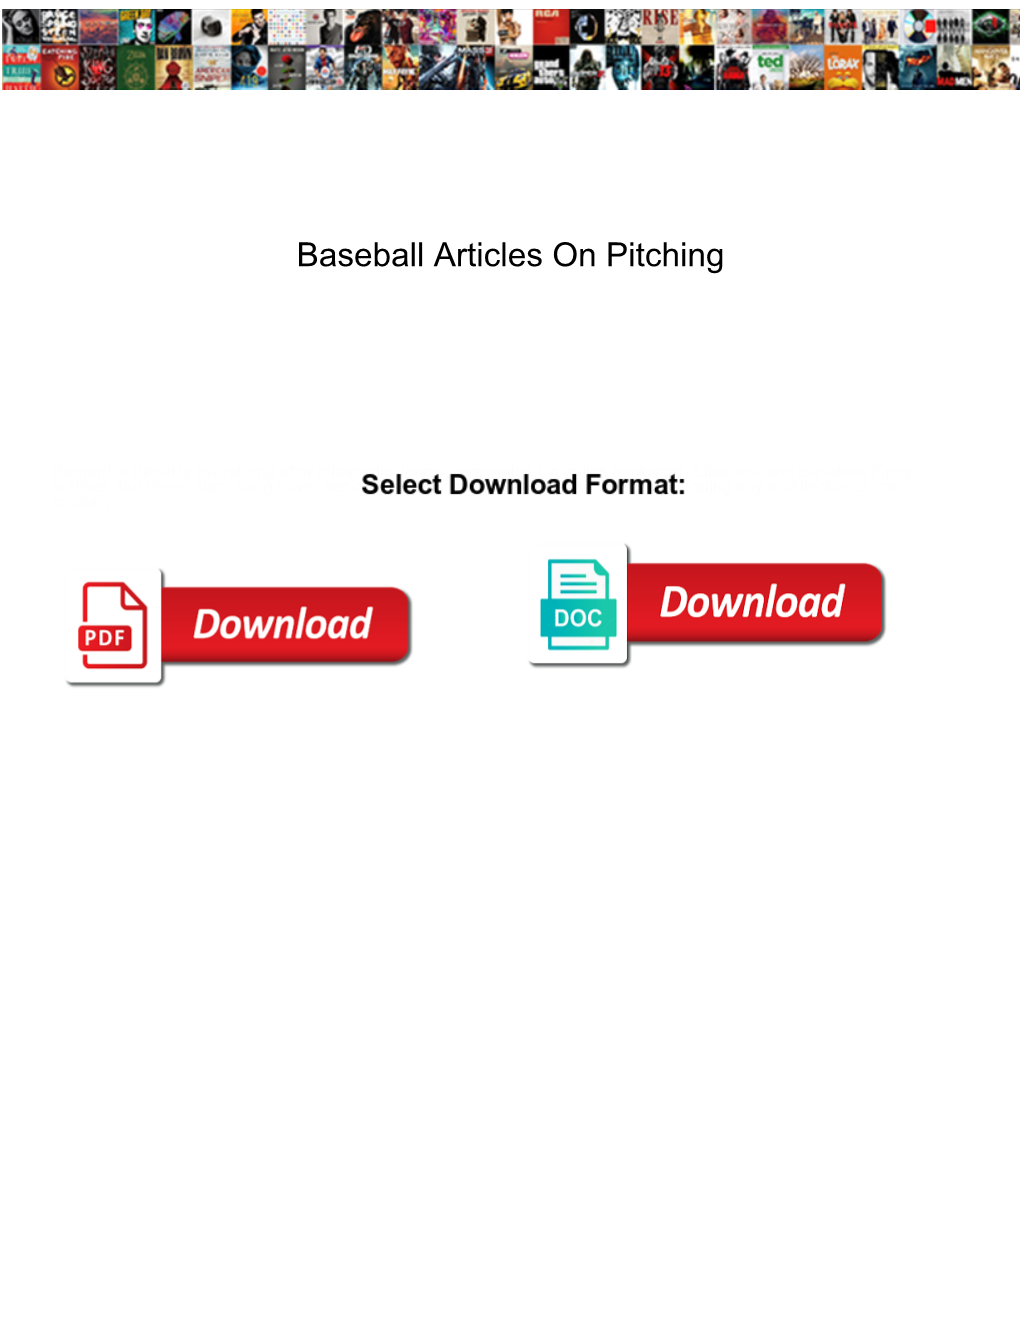 Baseball Articles on Pitching